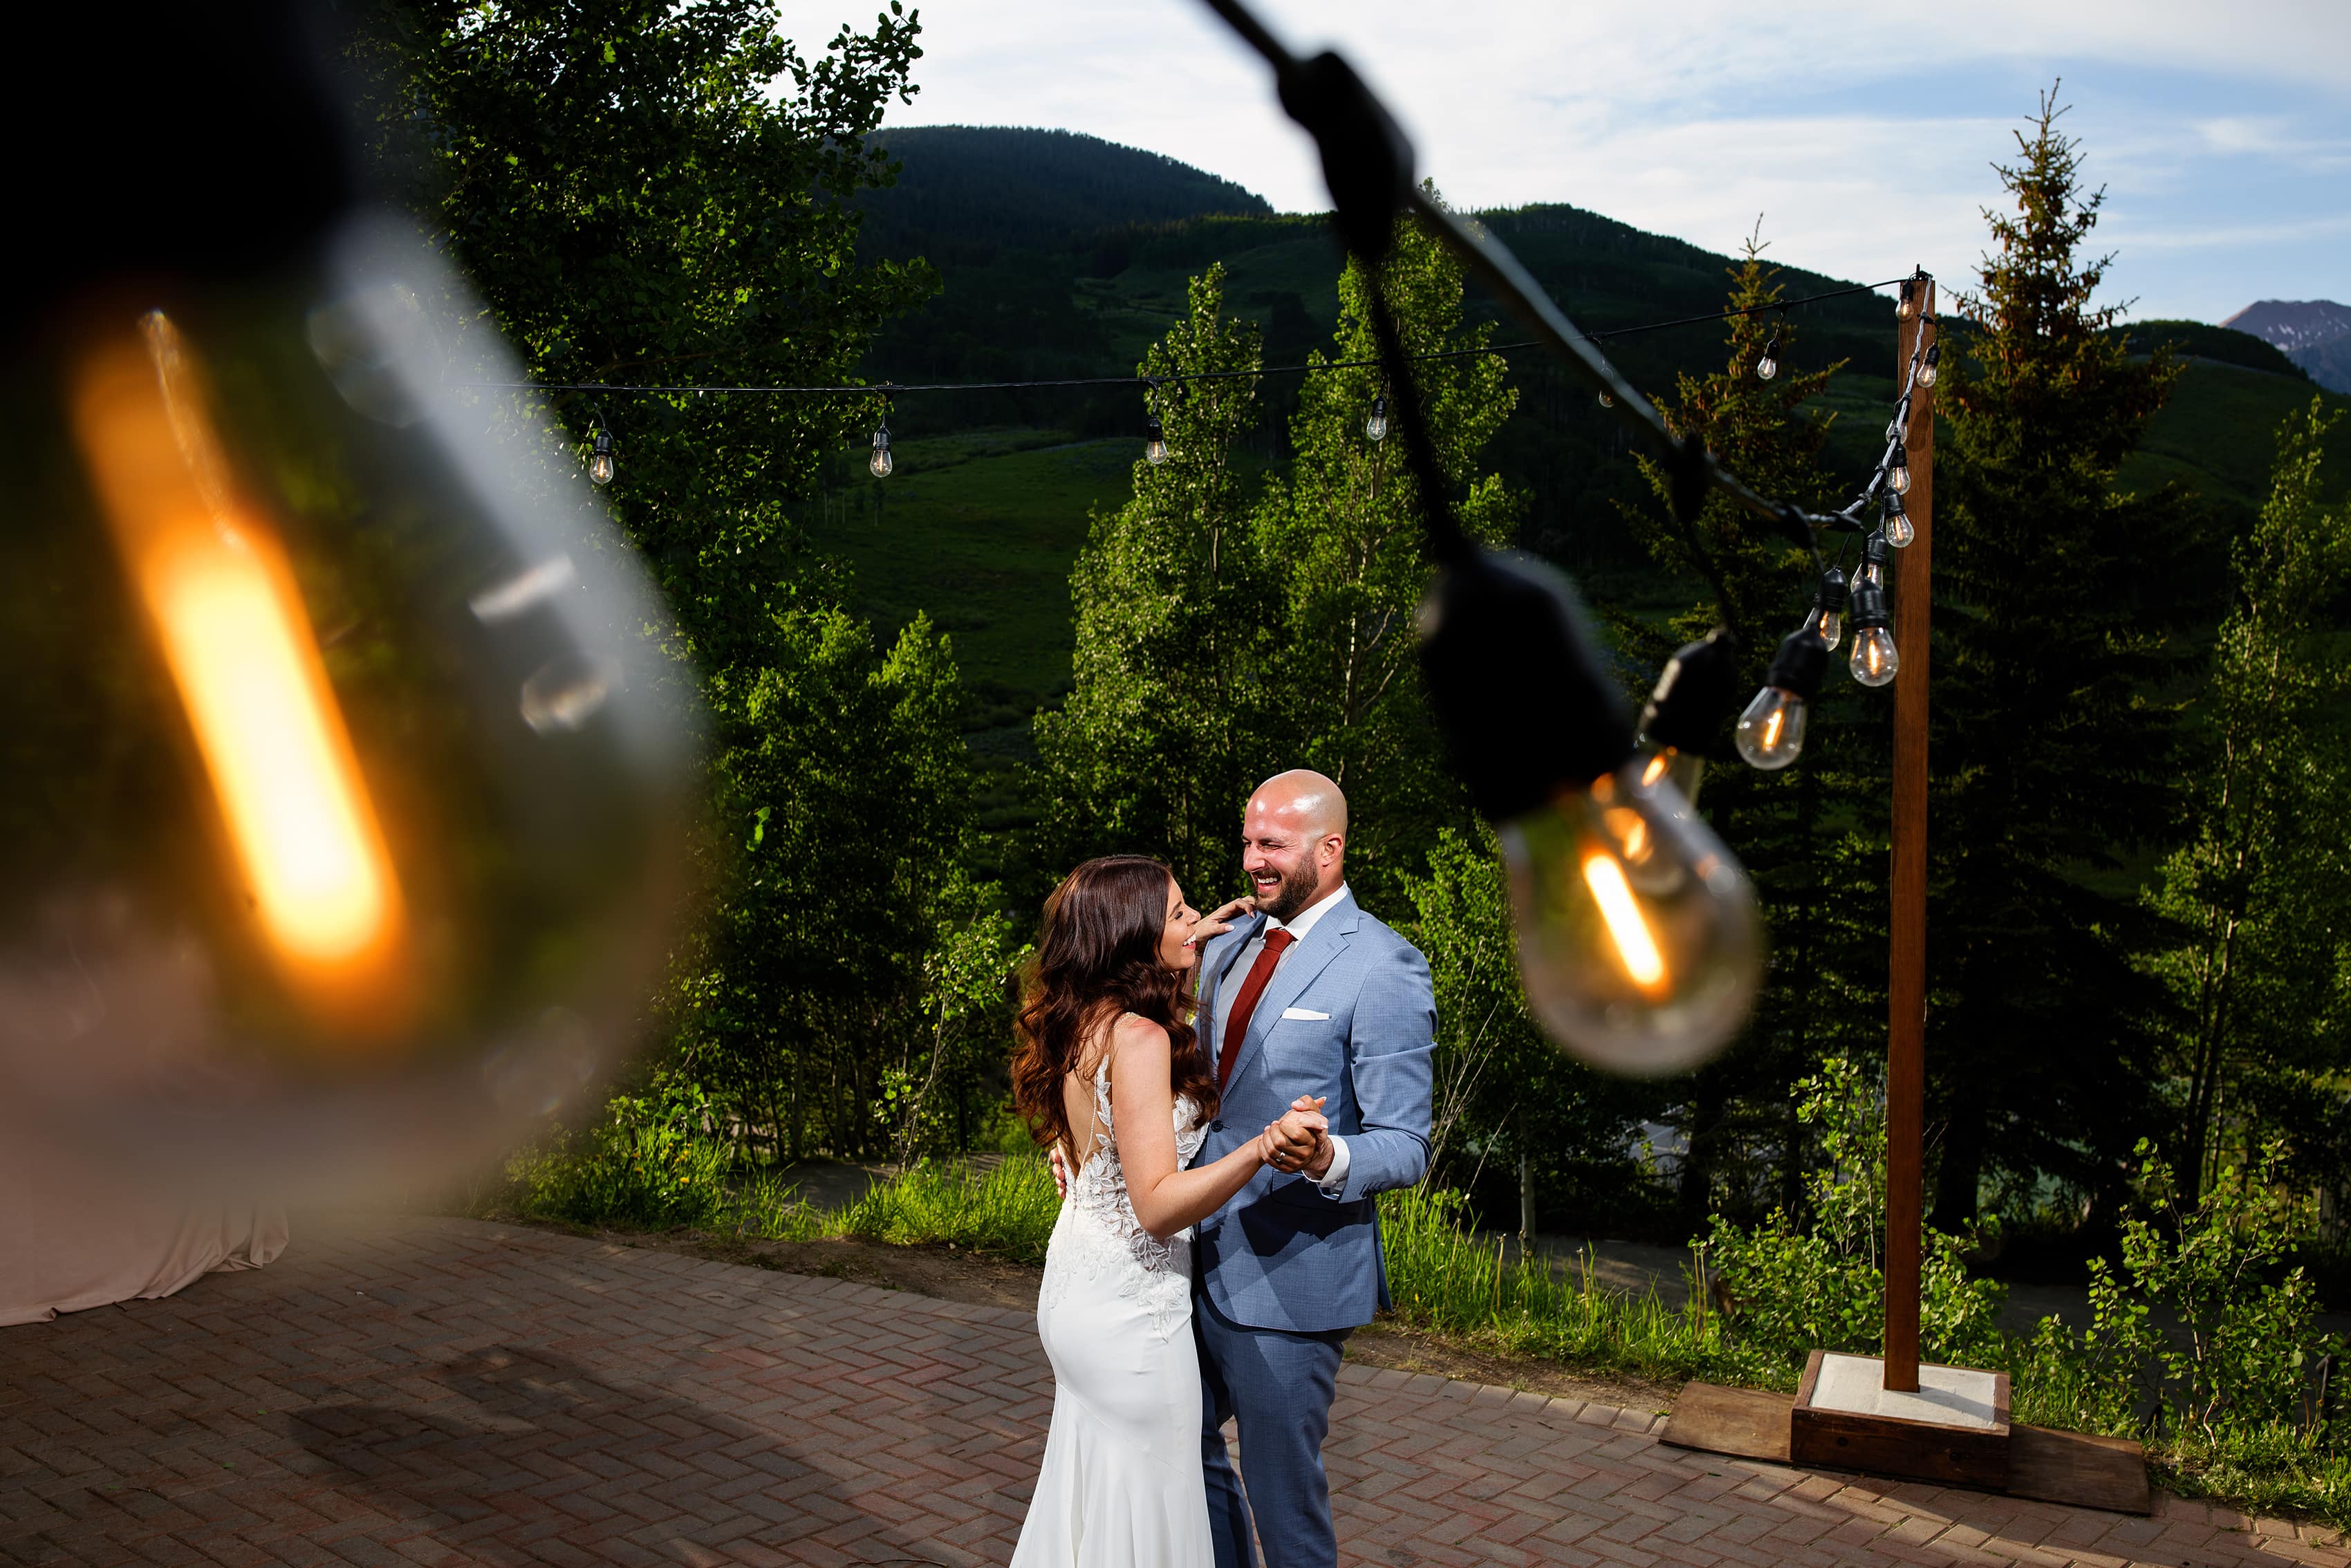 The bride and groom share their first dance together at Mountain Wedding Garden in Crested Butte